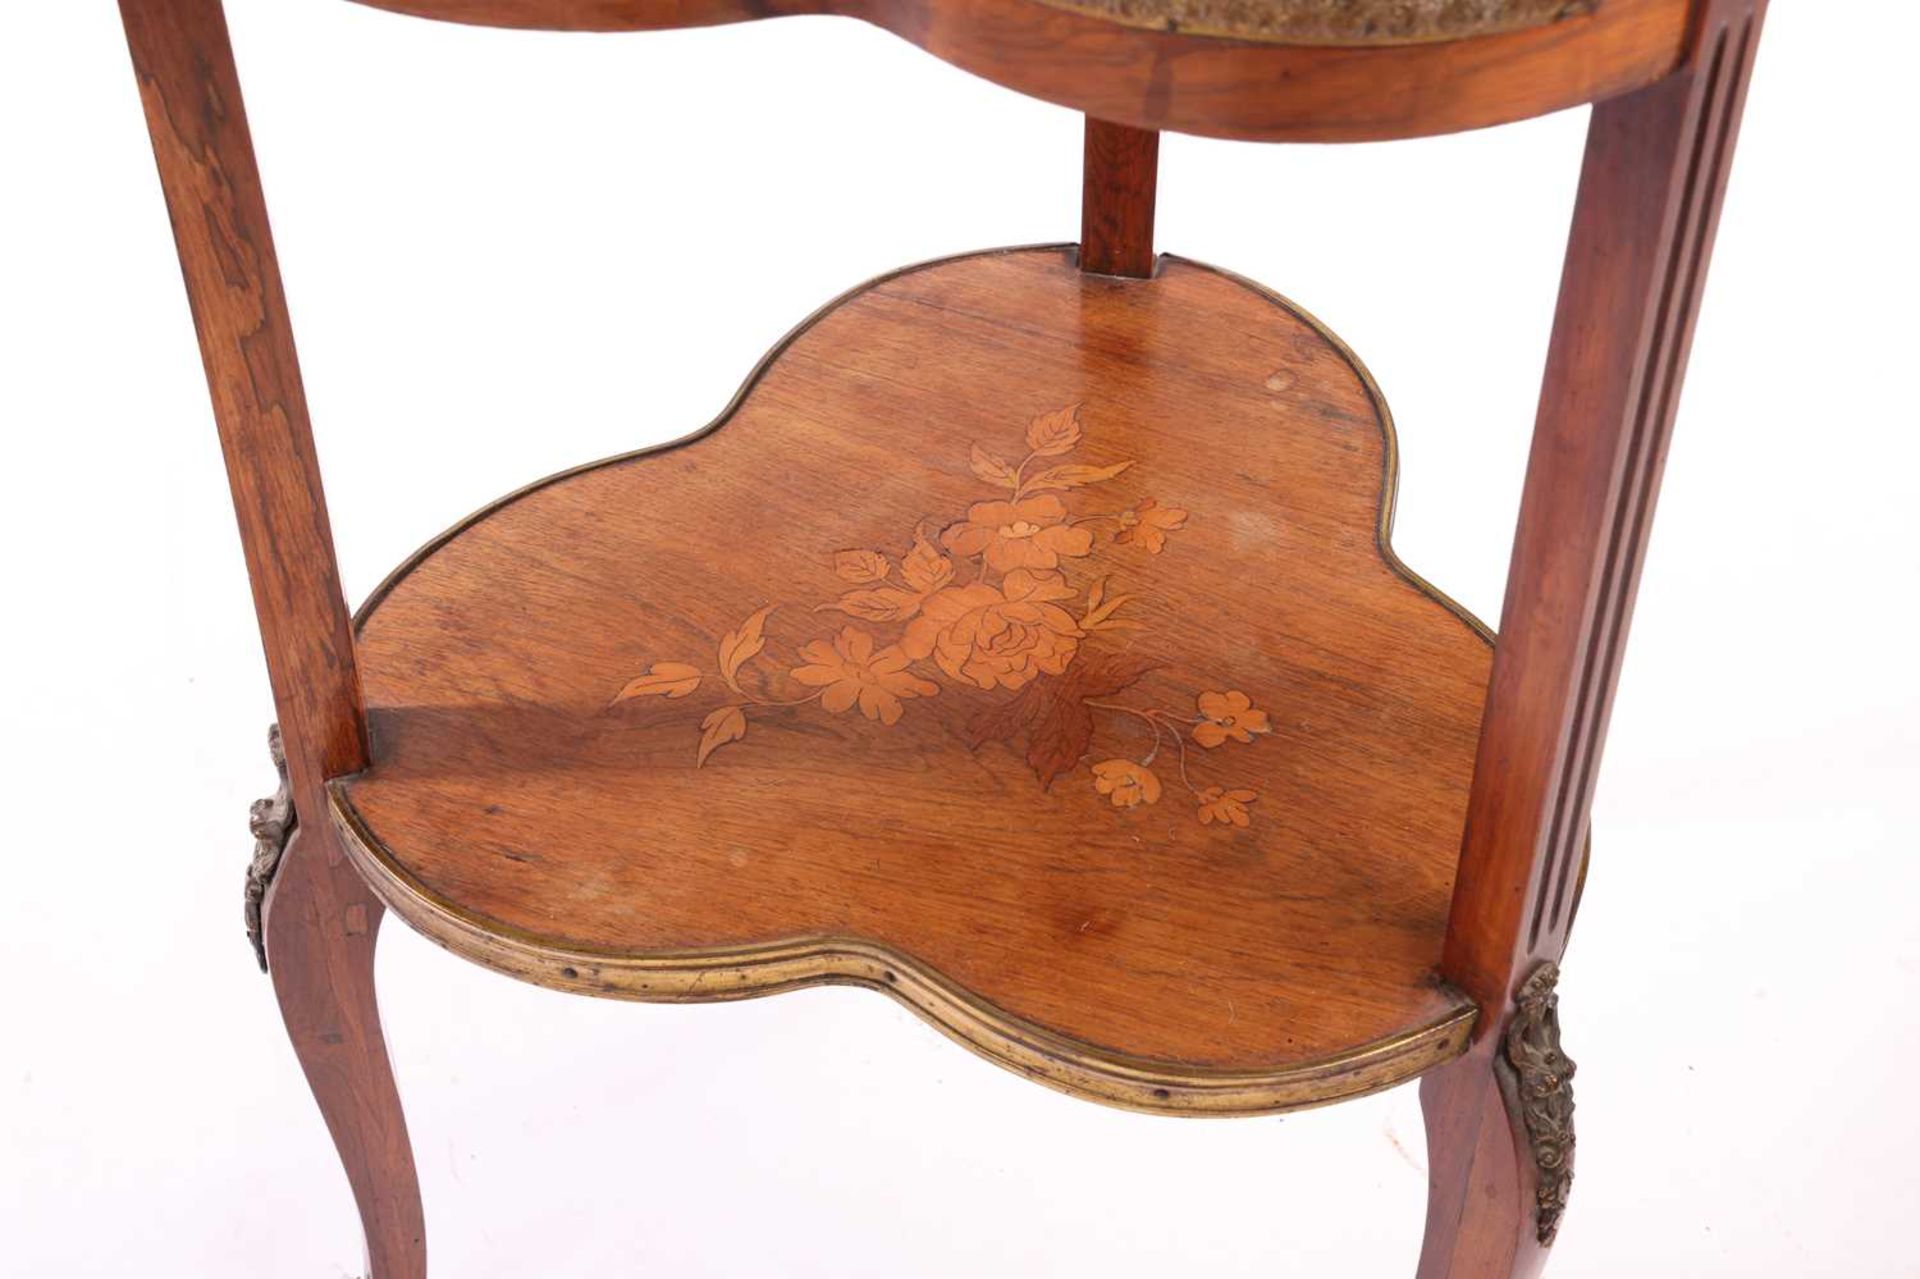 A Napoleon III walnut and marquetry "Club" shaped bijouterie table, with gilt metal mounts throughou - Image 3 of 6